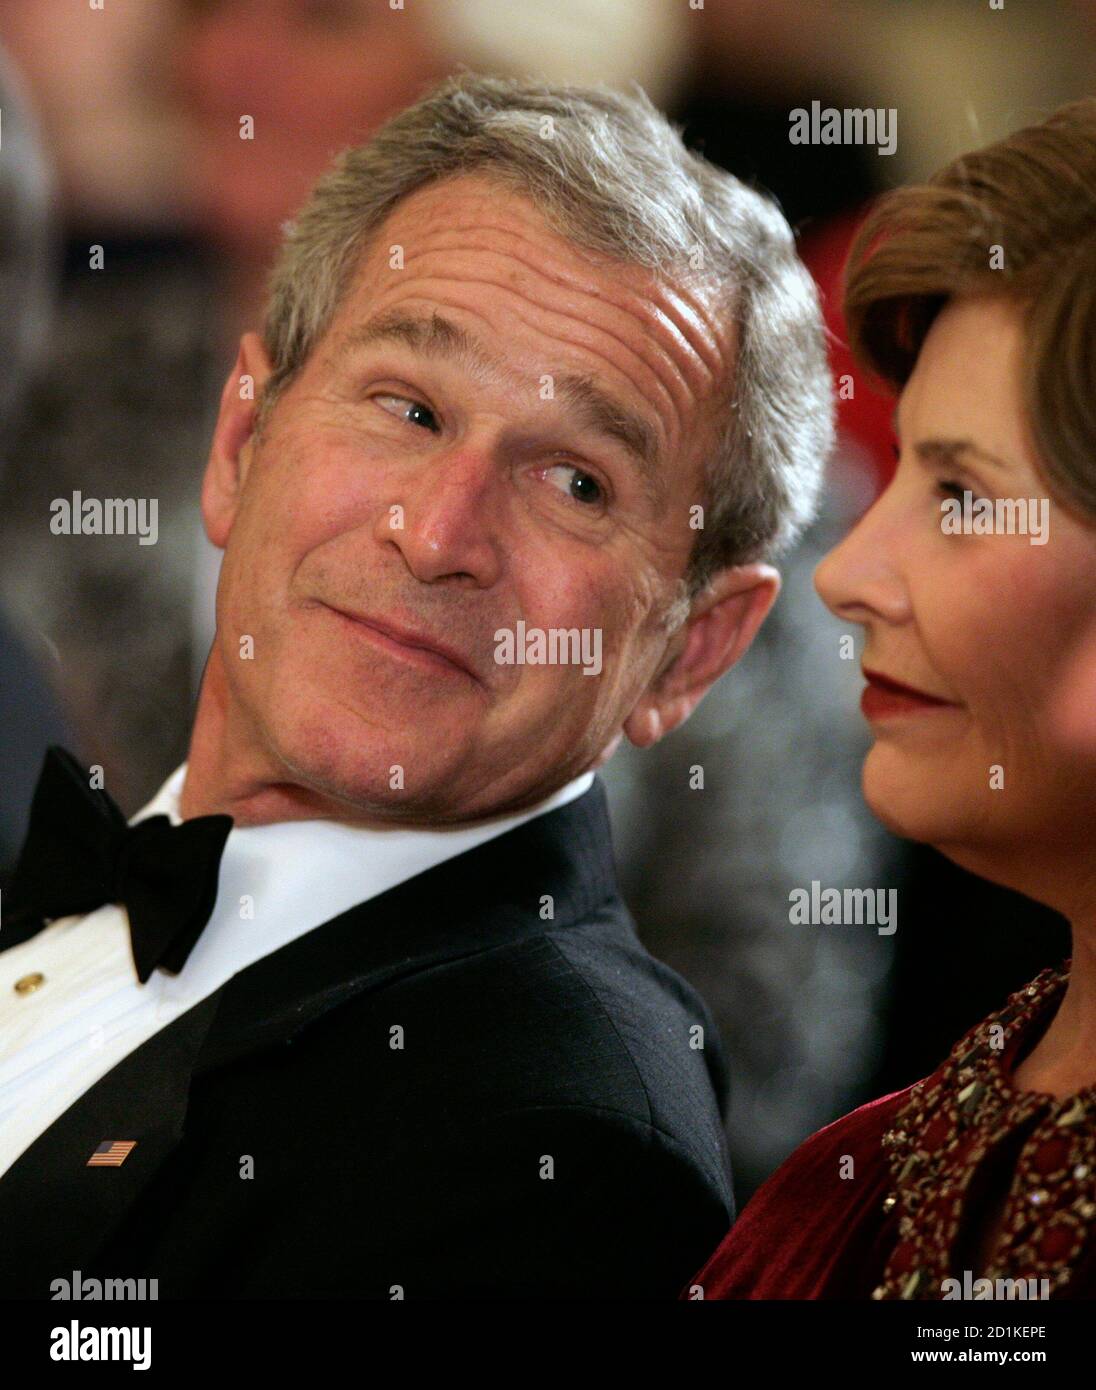 U.S. President George W. Bush looks at first lady Laura Bush as they attend Valentine?s Day Entertainment at the White House in Washington February 14, 2008. REUTERS/Yuri Gripas (UNITED STATES) Stock Photo